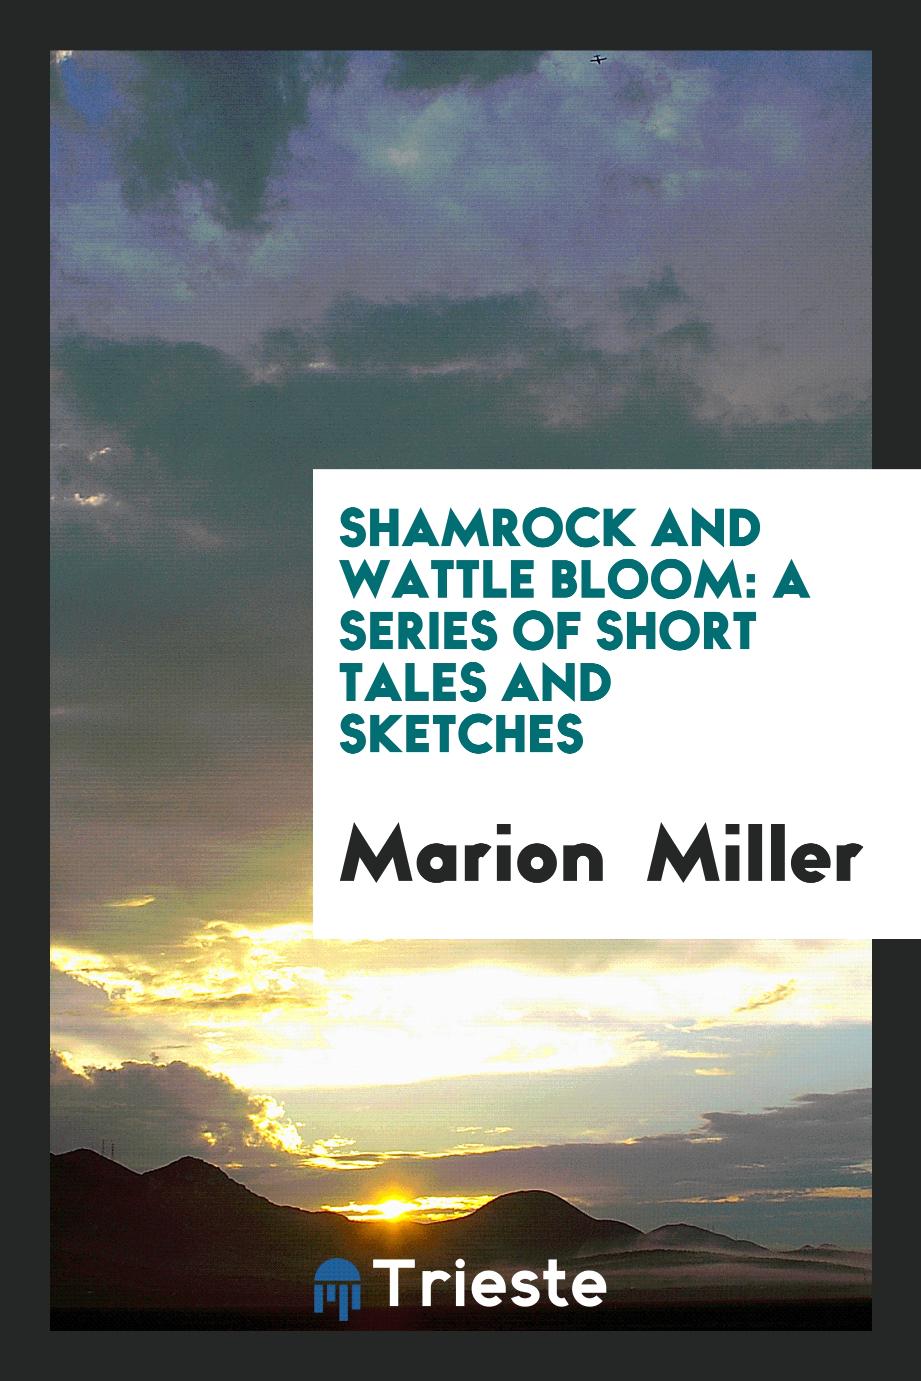 Shamrock and wattle bloom: a series of short tales and sketches